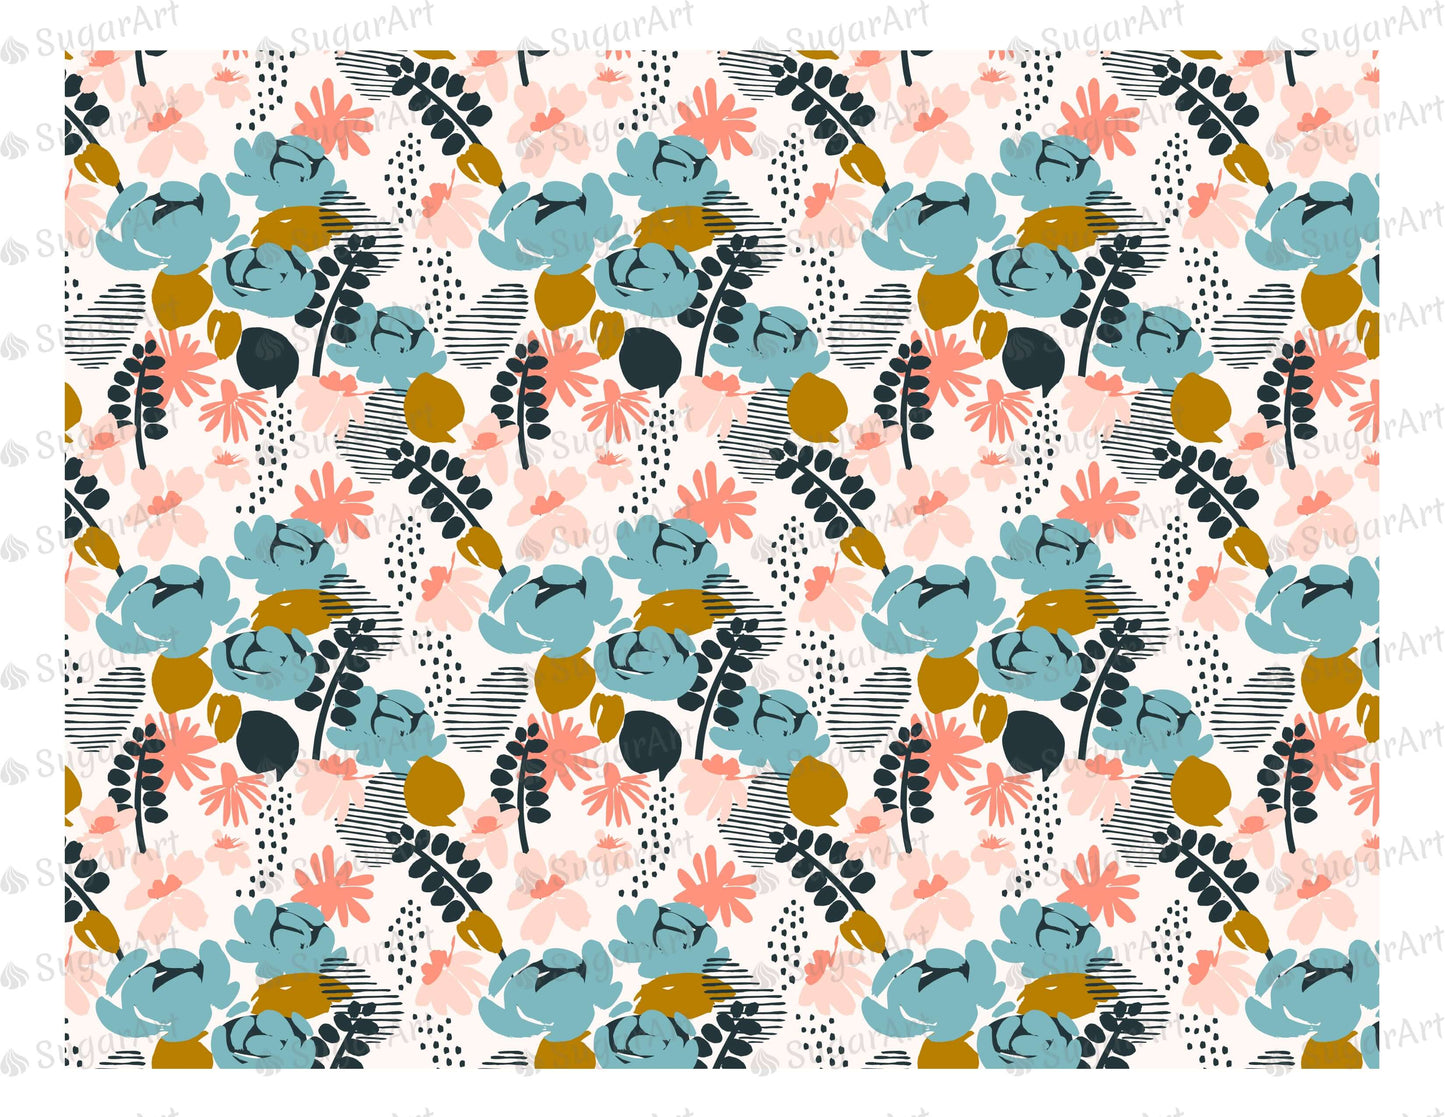 Abstract Floral Pattern - Icing - ISA025.